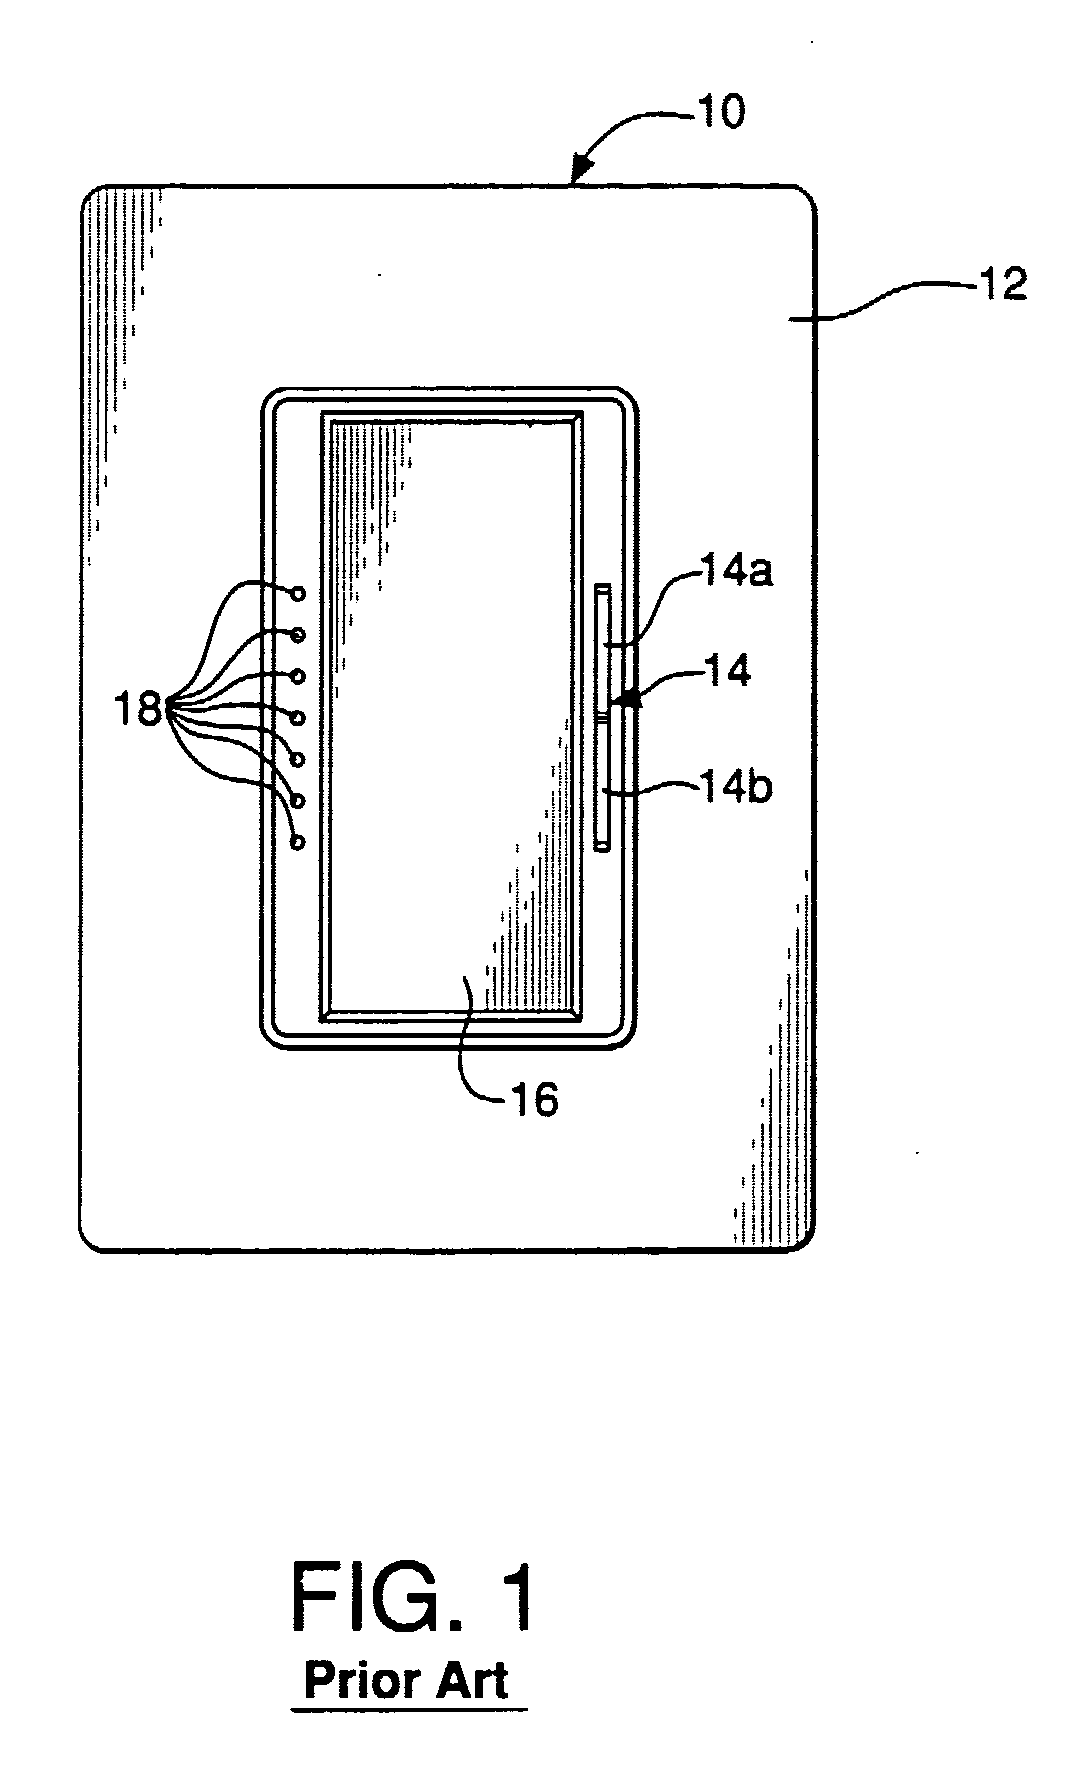 Lighting control device having improved long fade off